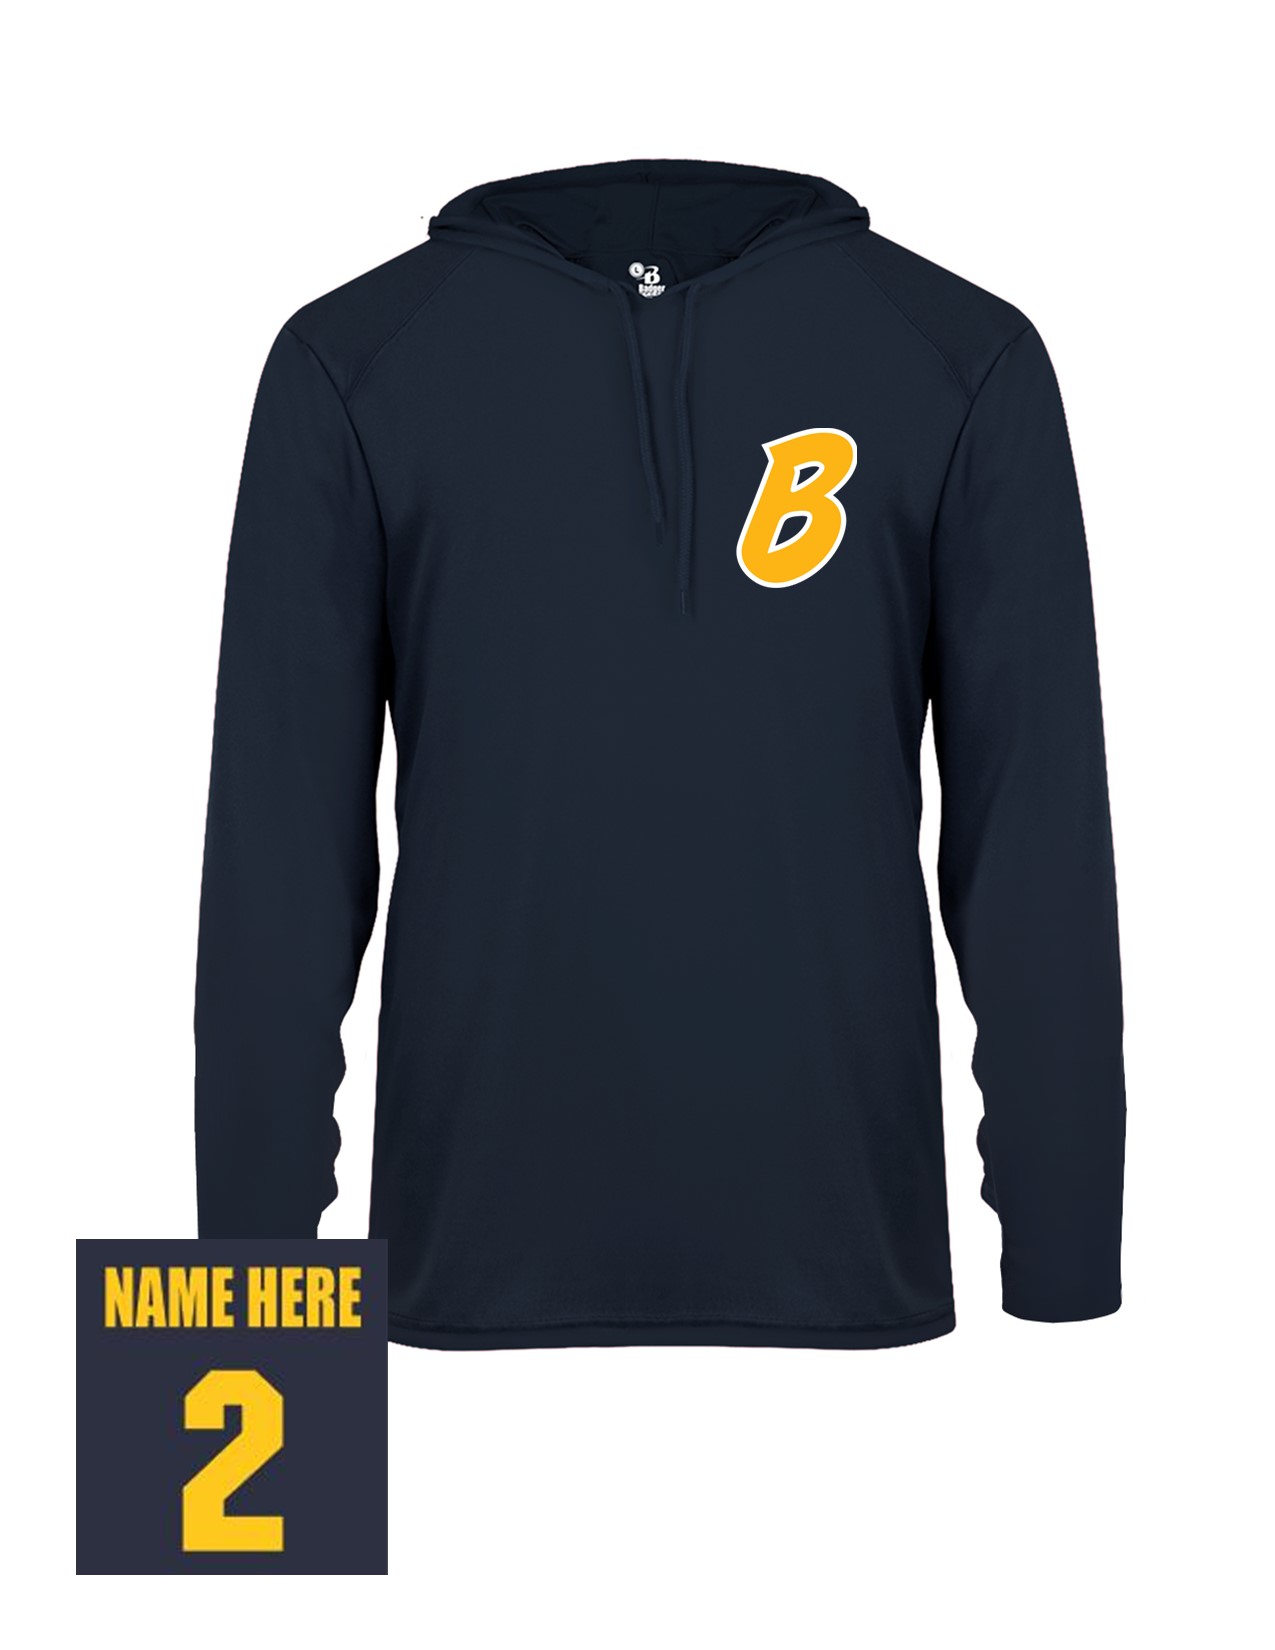 76b Badger 4105 Adult B-Core Performance 100% Poly Wicking Hooded Tee with Bombers "B" LC Logo